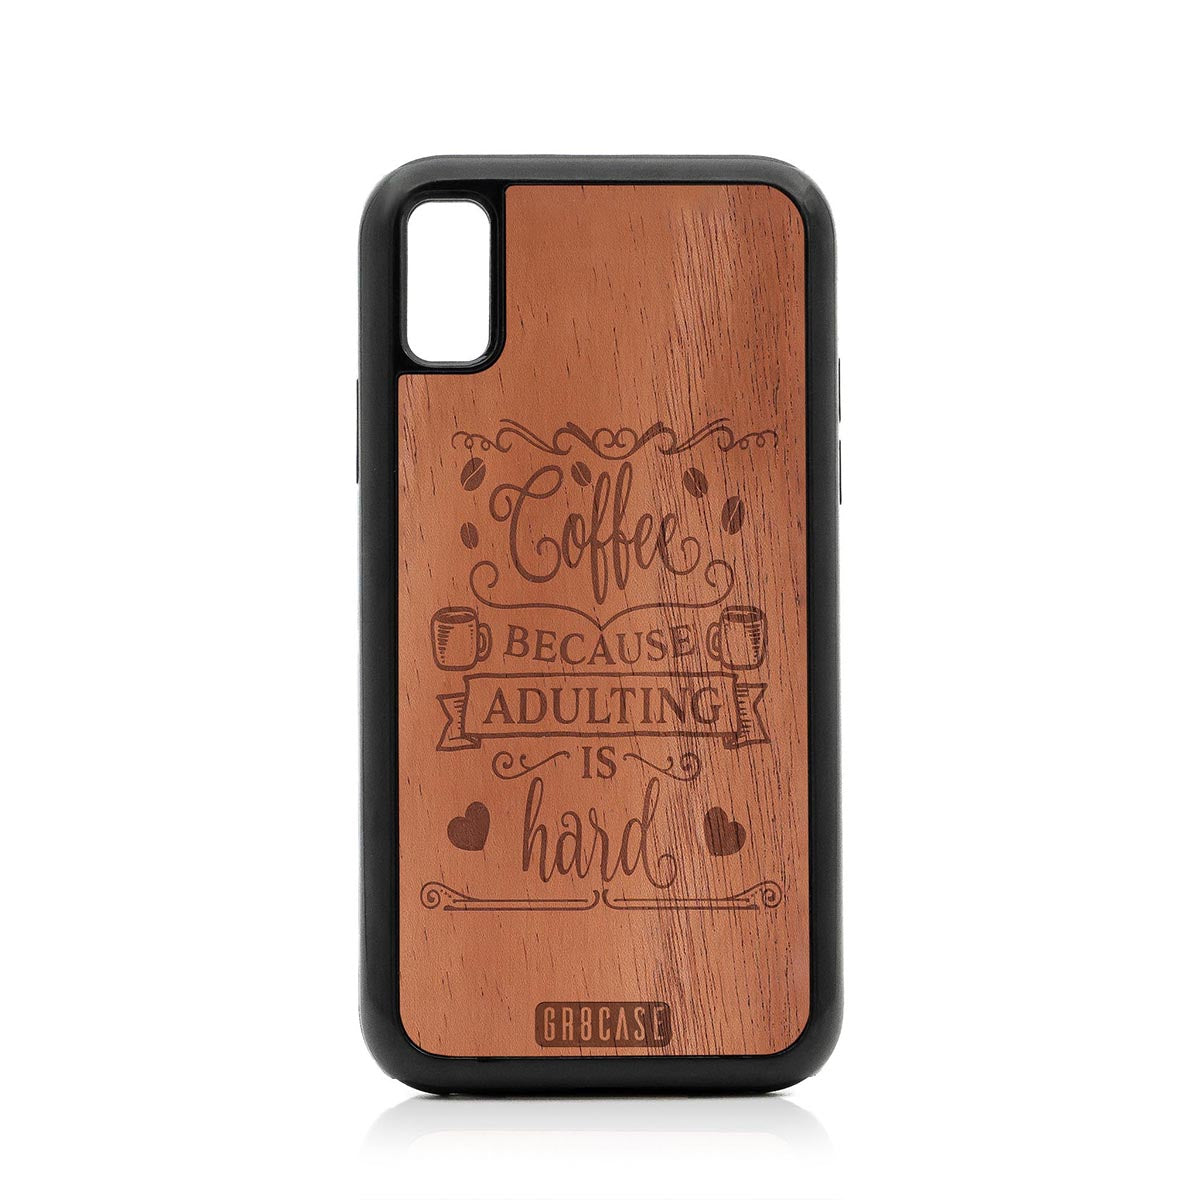 Coffee Because Adulting Is Hard Design Wood Case For iPhone XS Max by GR8CASE